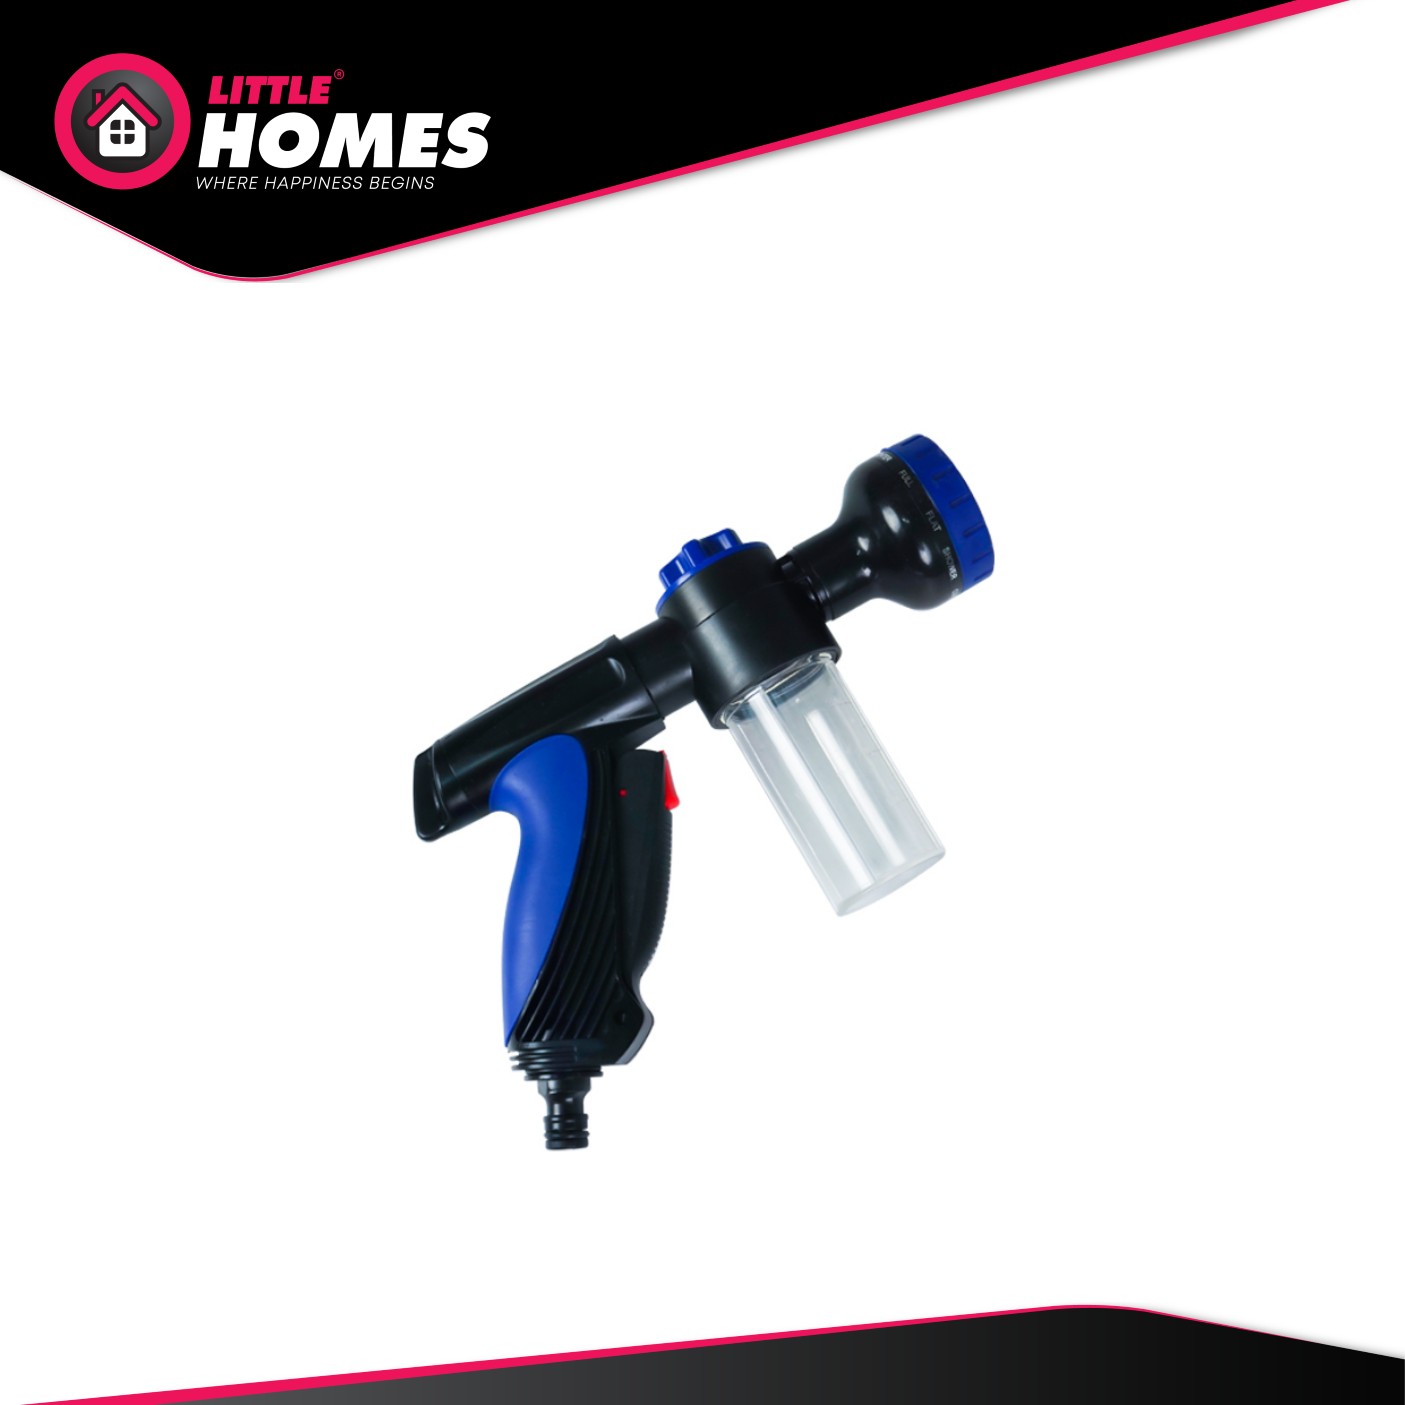 Little Homes Multifunctional Washing Gun with Soap Dispenser 2 in 1 Sprayer Cleaning Tool